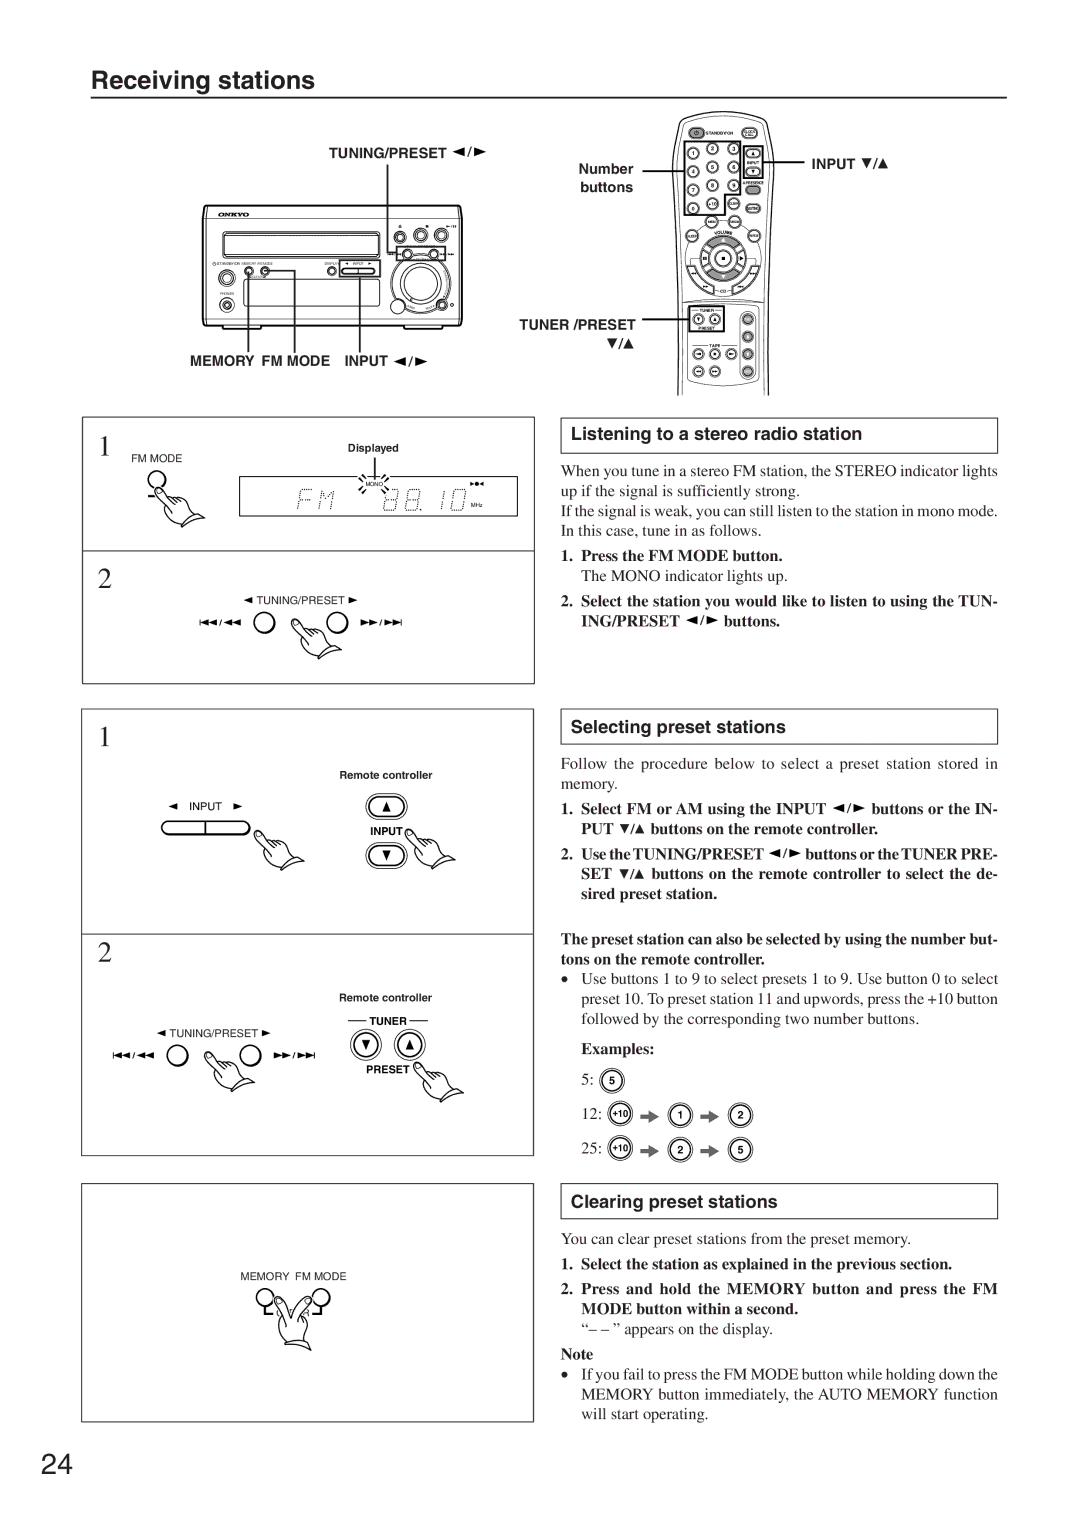 Onkyo CR-305FX instruction manual Listening to a stereo radio station, Clearing preset stations, Examples 5 